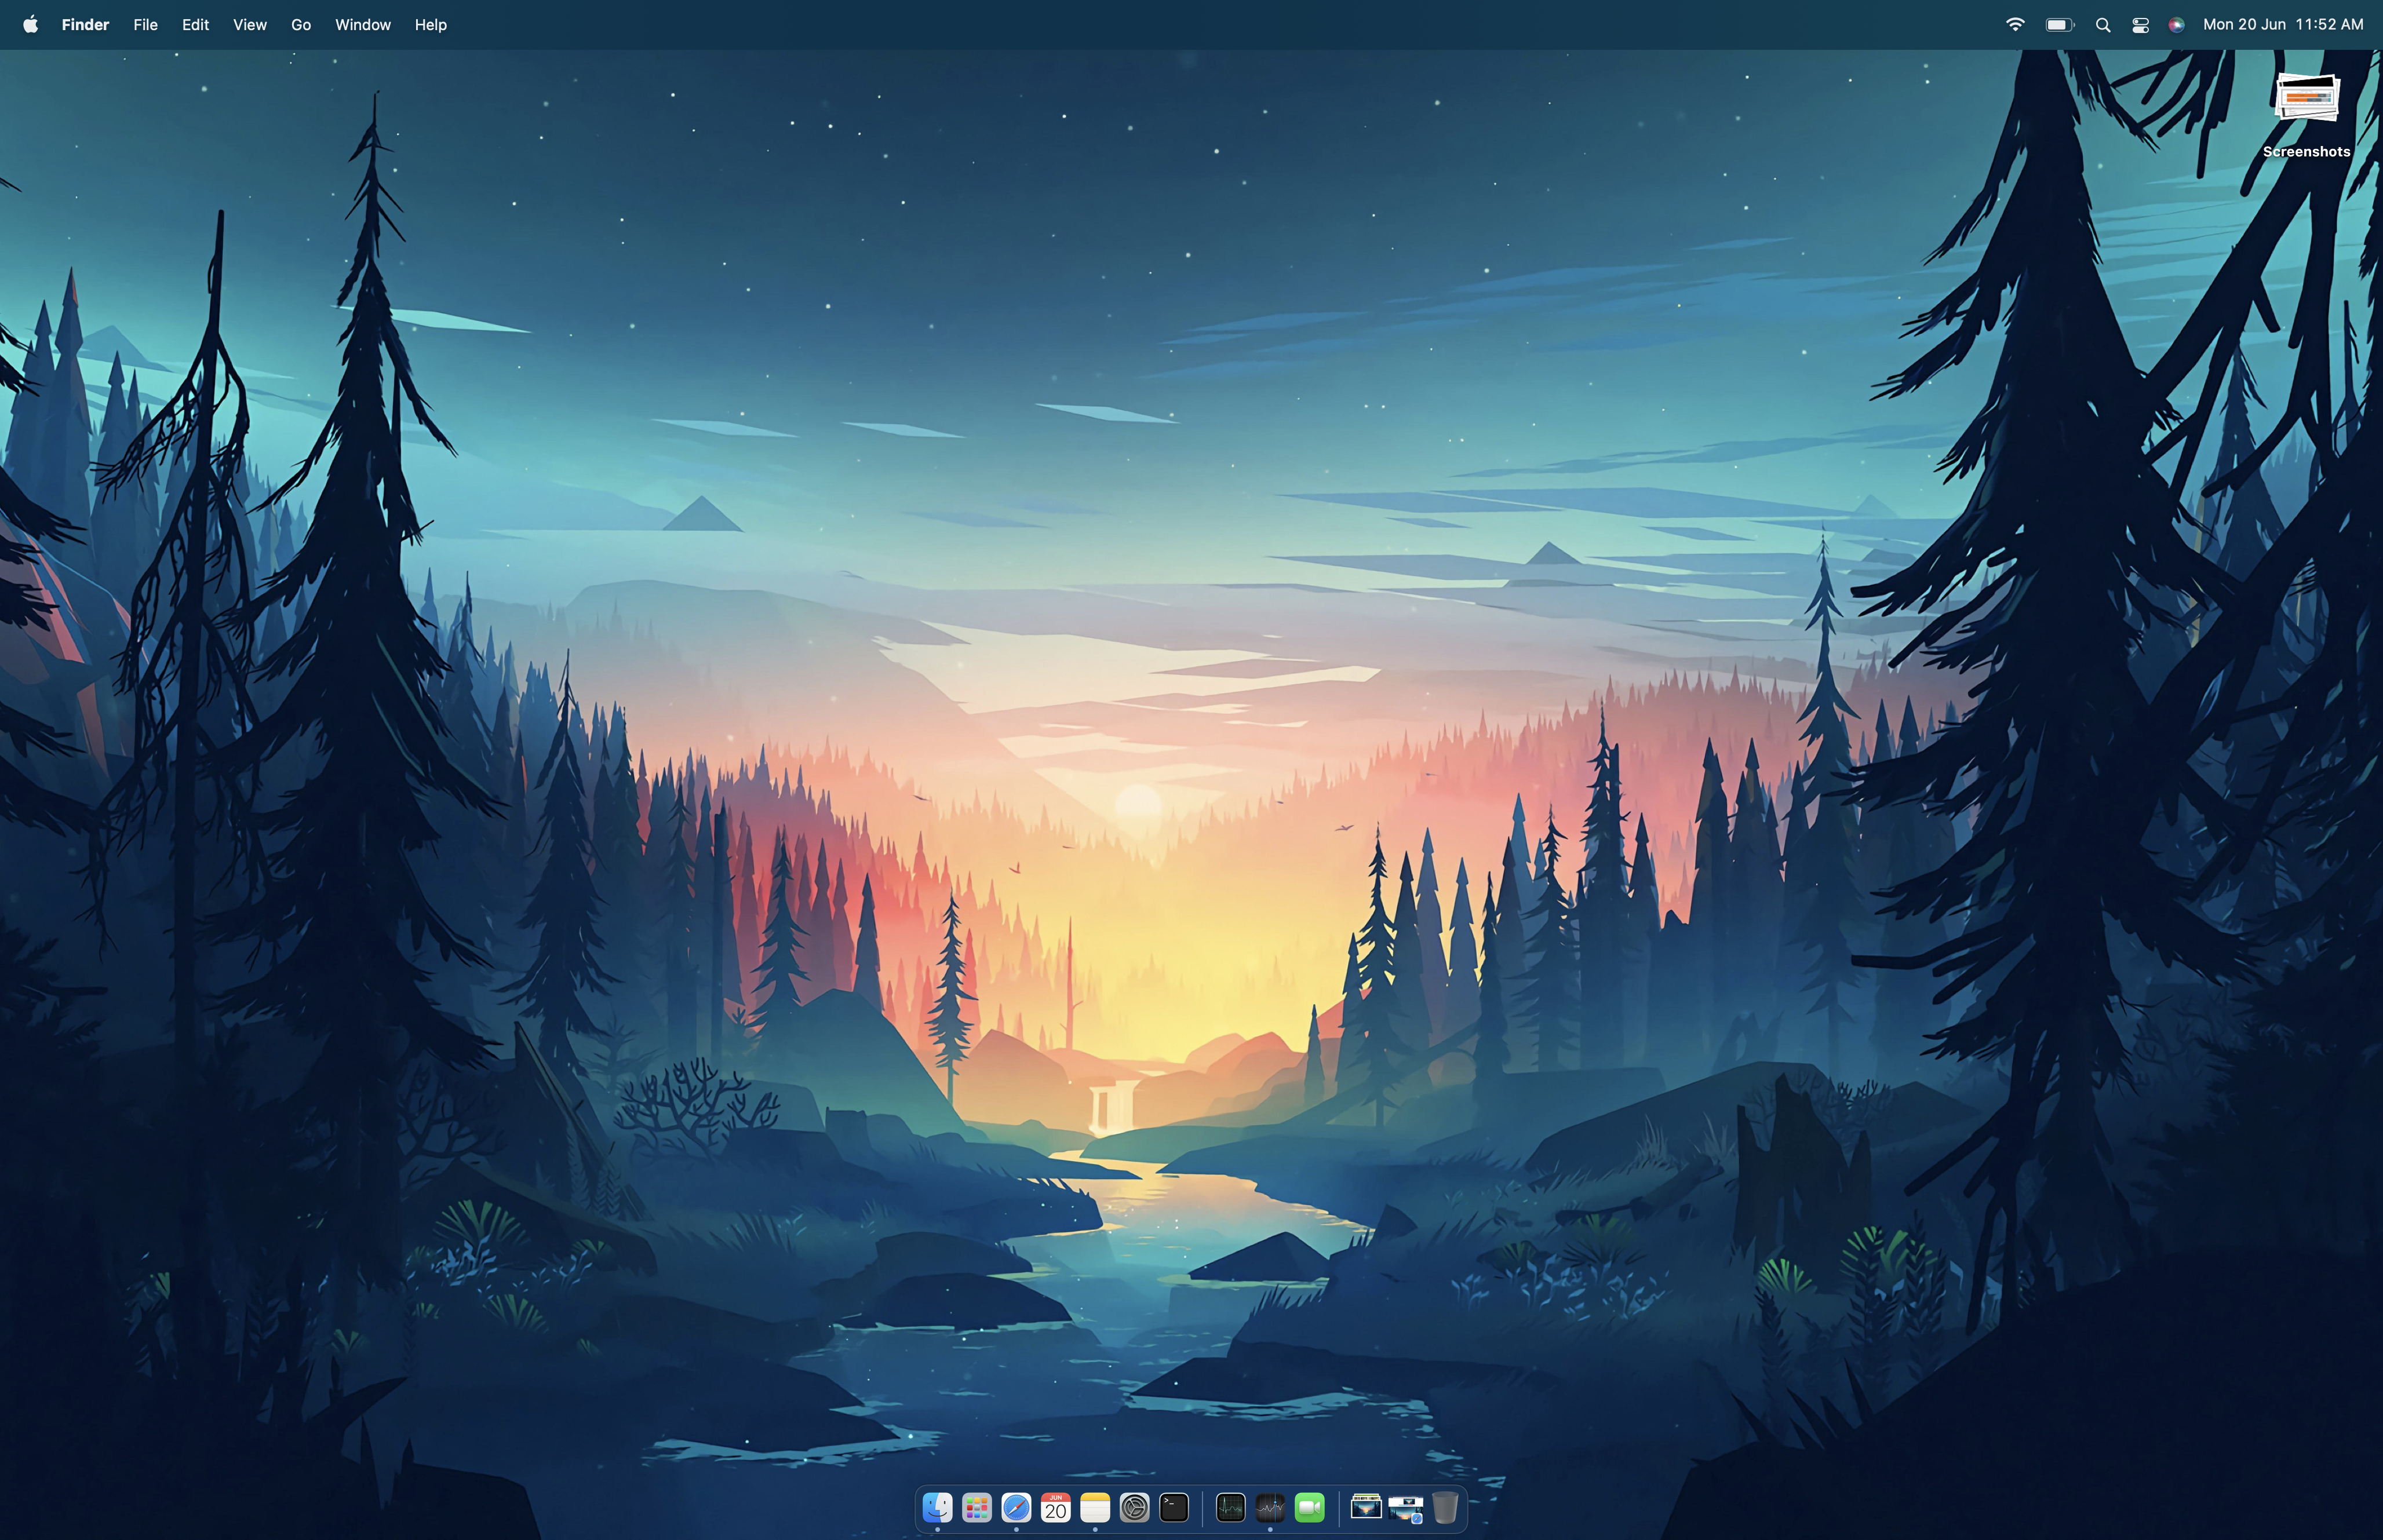 Found an awesome wallpaper that suits my Mac